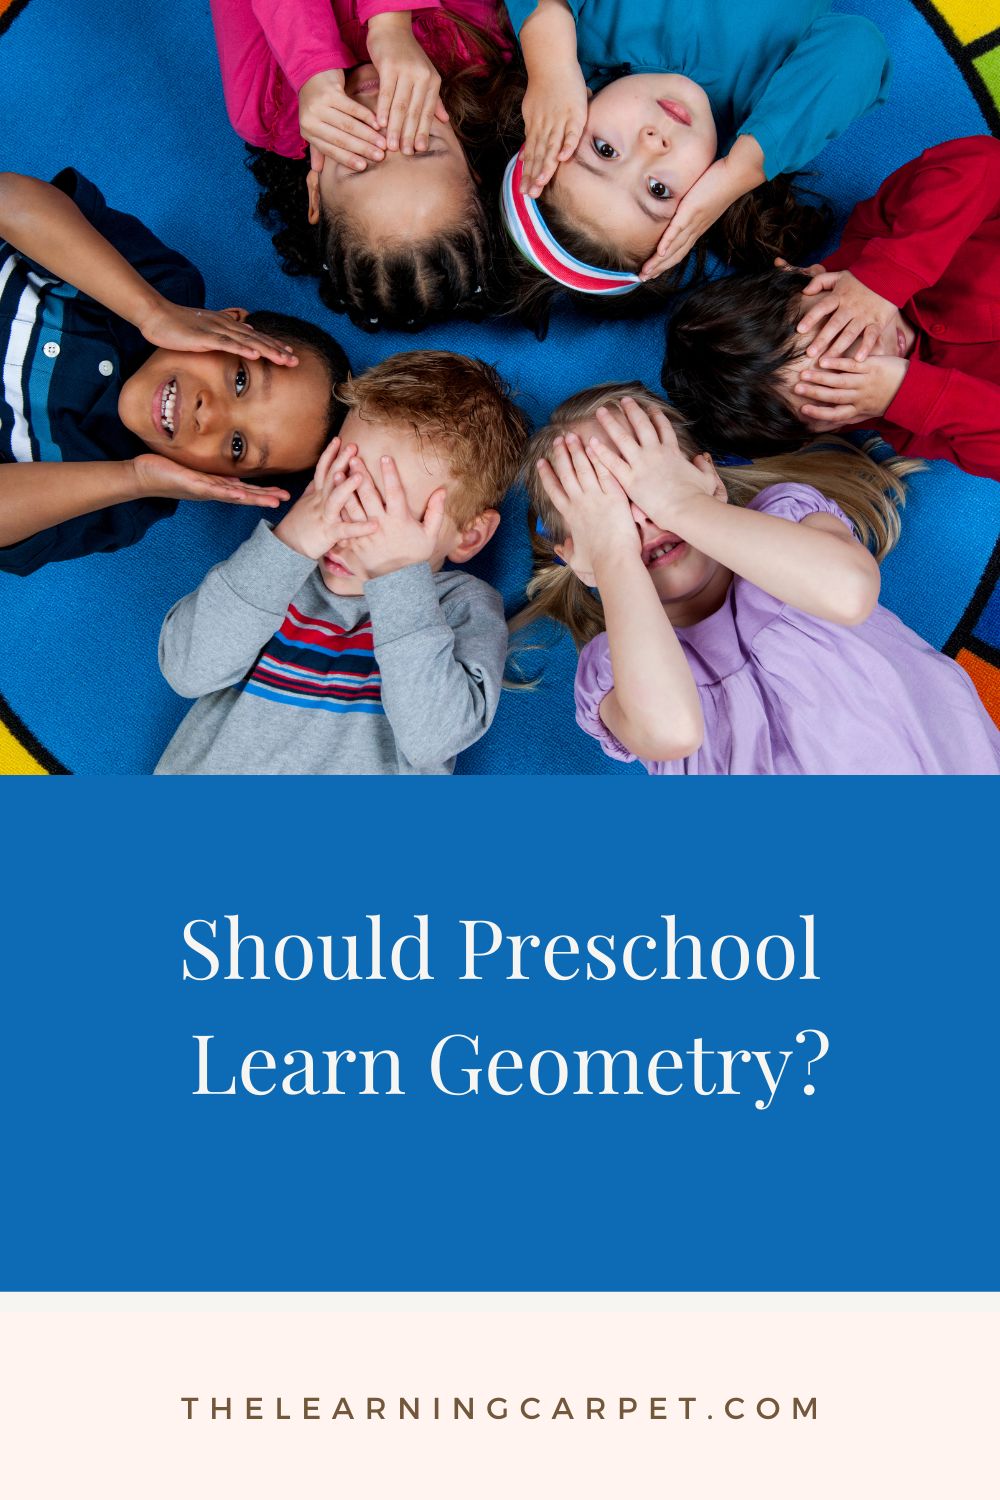 Featured image for “Should Preschoolers Learn Geometry?”